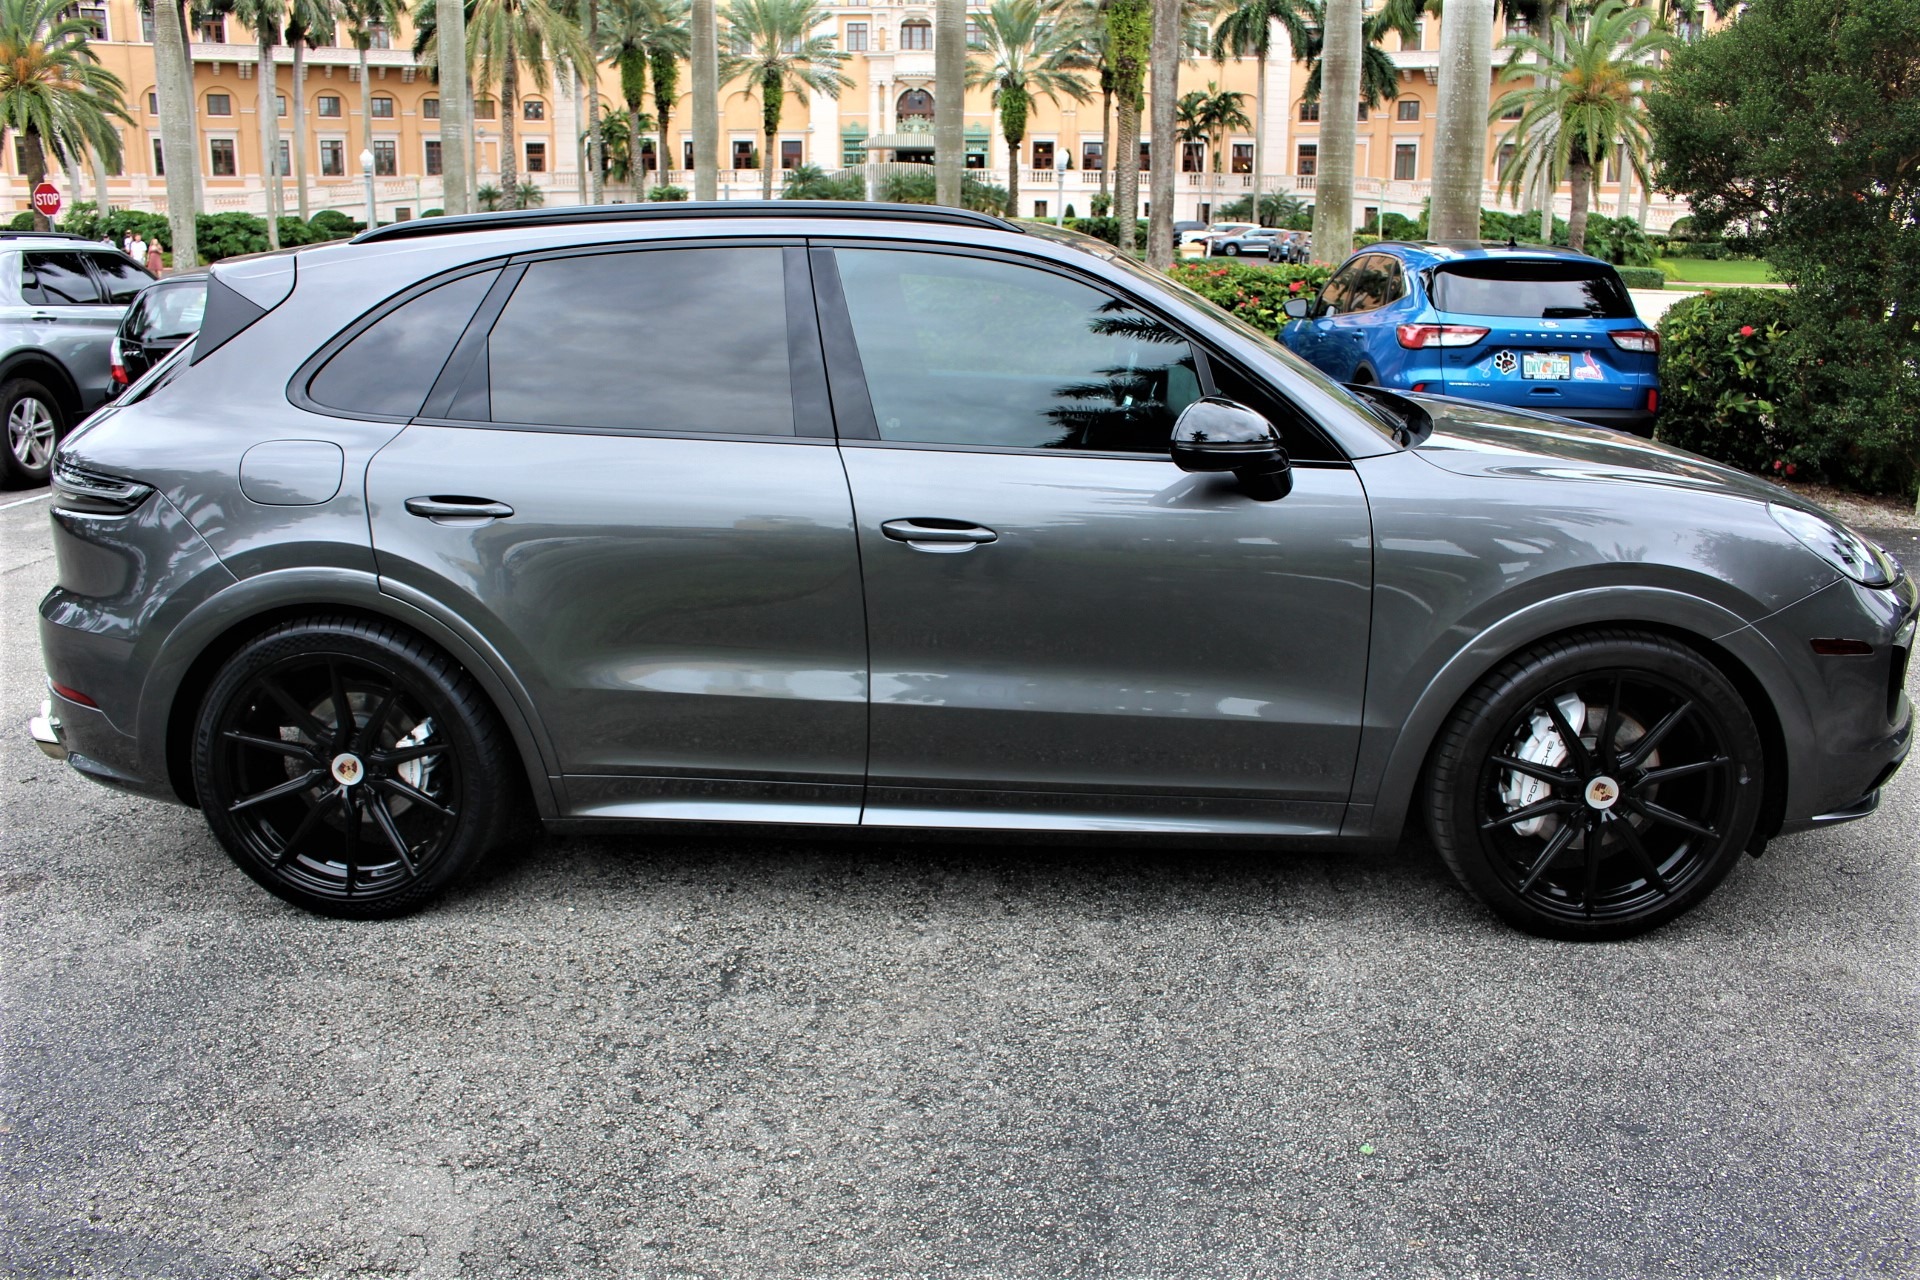 Used 2019 Porsche Cayenne for sale Sold at The Gables Sports Cars in Miami FL 33146 2